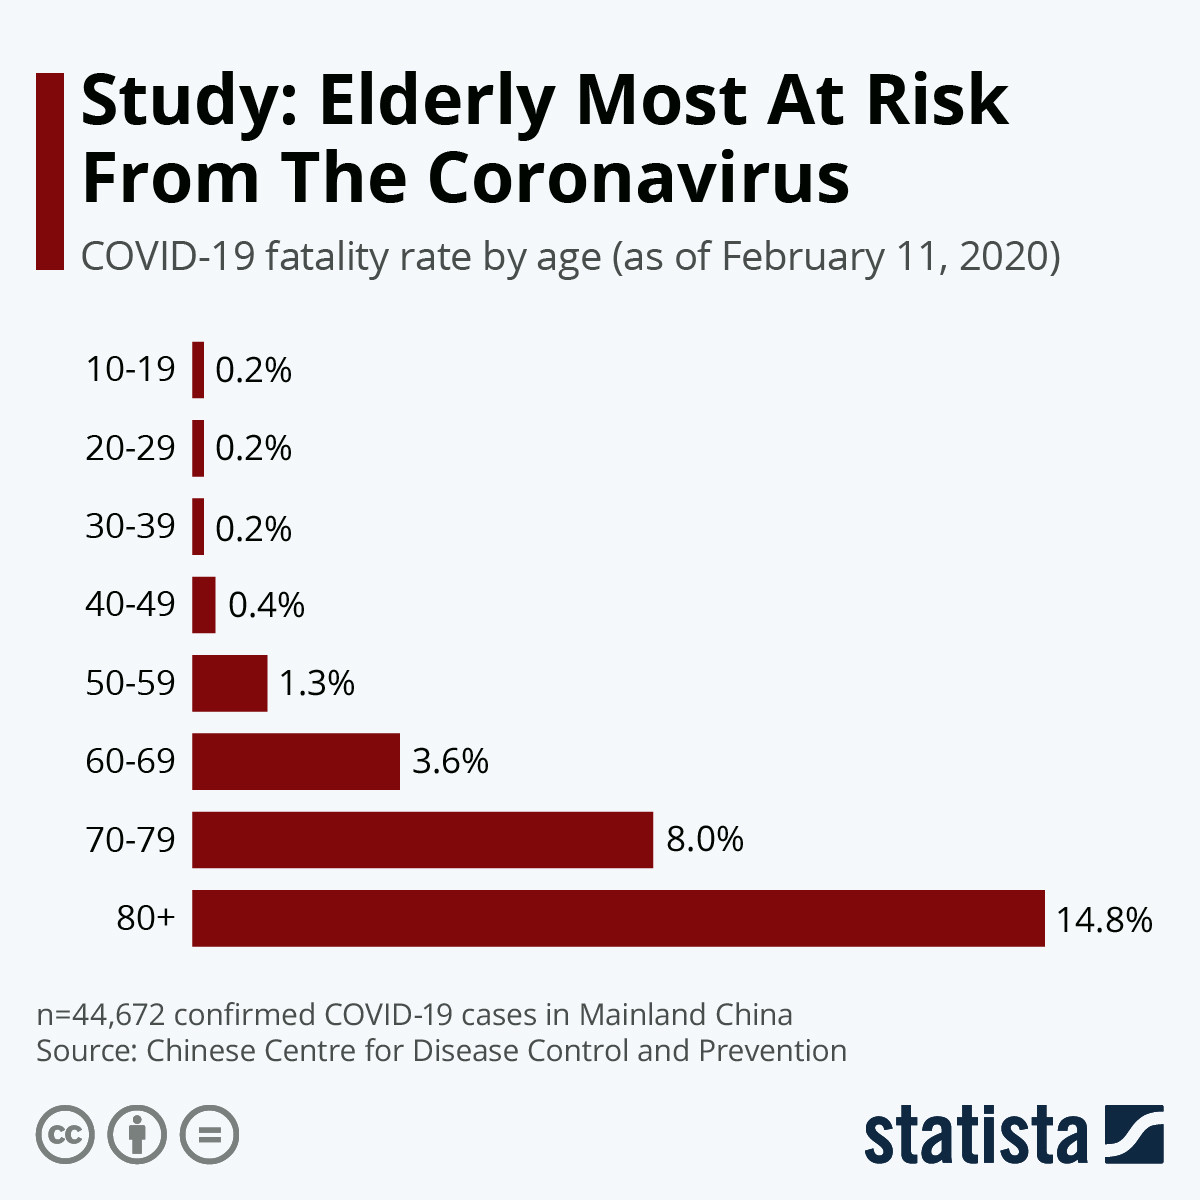 it can also leave the door open to secondary infections. Now in mild to moderate cases (80%), you'll be slightly ill for about 2-3weeks. In severe cases 13.8%, it can take 3-6weeks to recover. The remaining 6.2% can become critical. Fatality rates differ by age group.